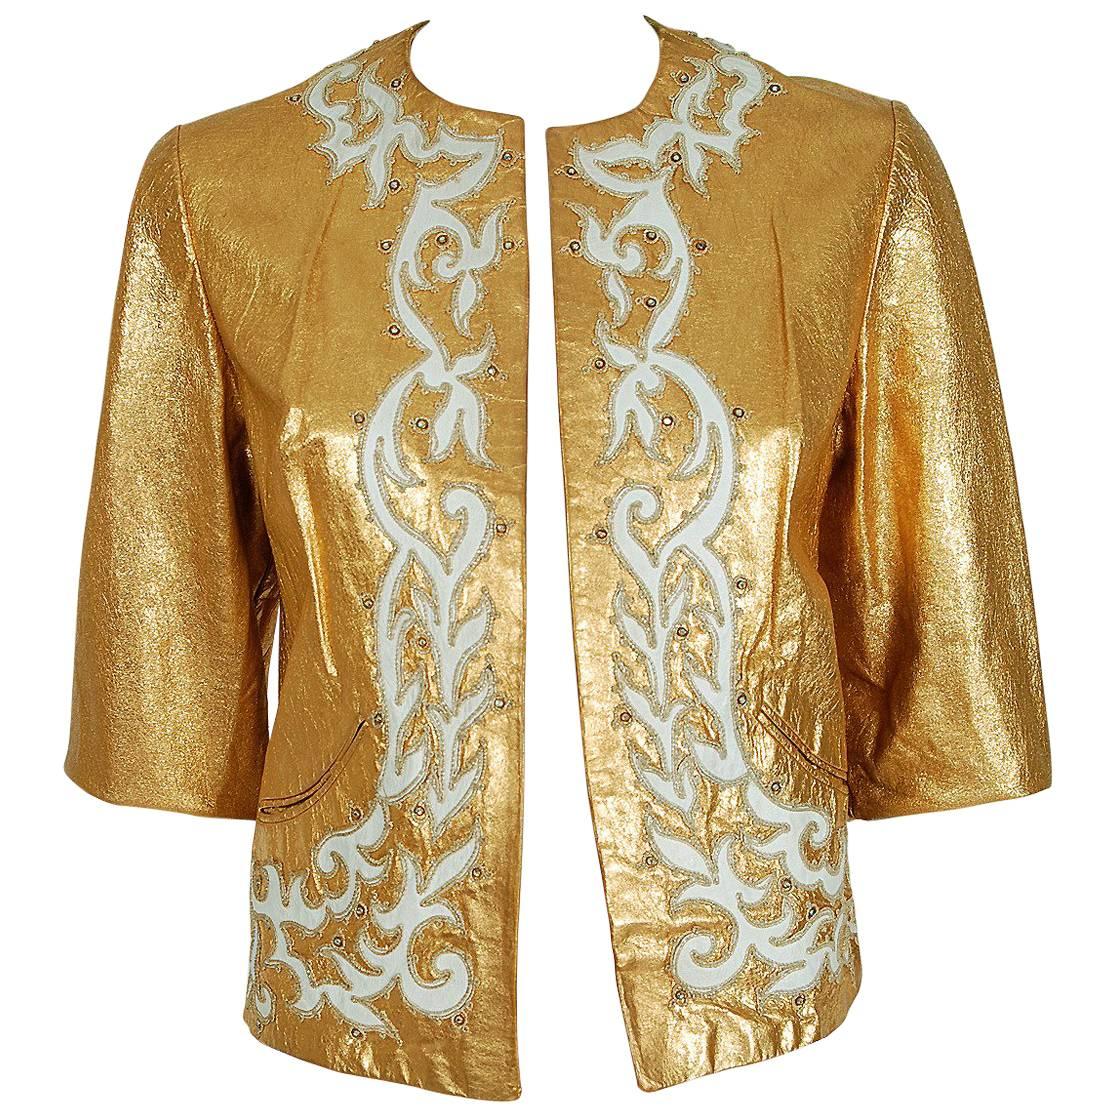 1950's Metallic-Gold Leather Rhinestone Embroidered Applique Cropped Jacket